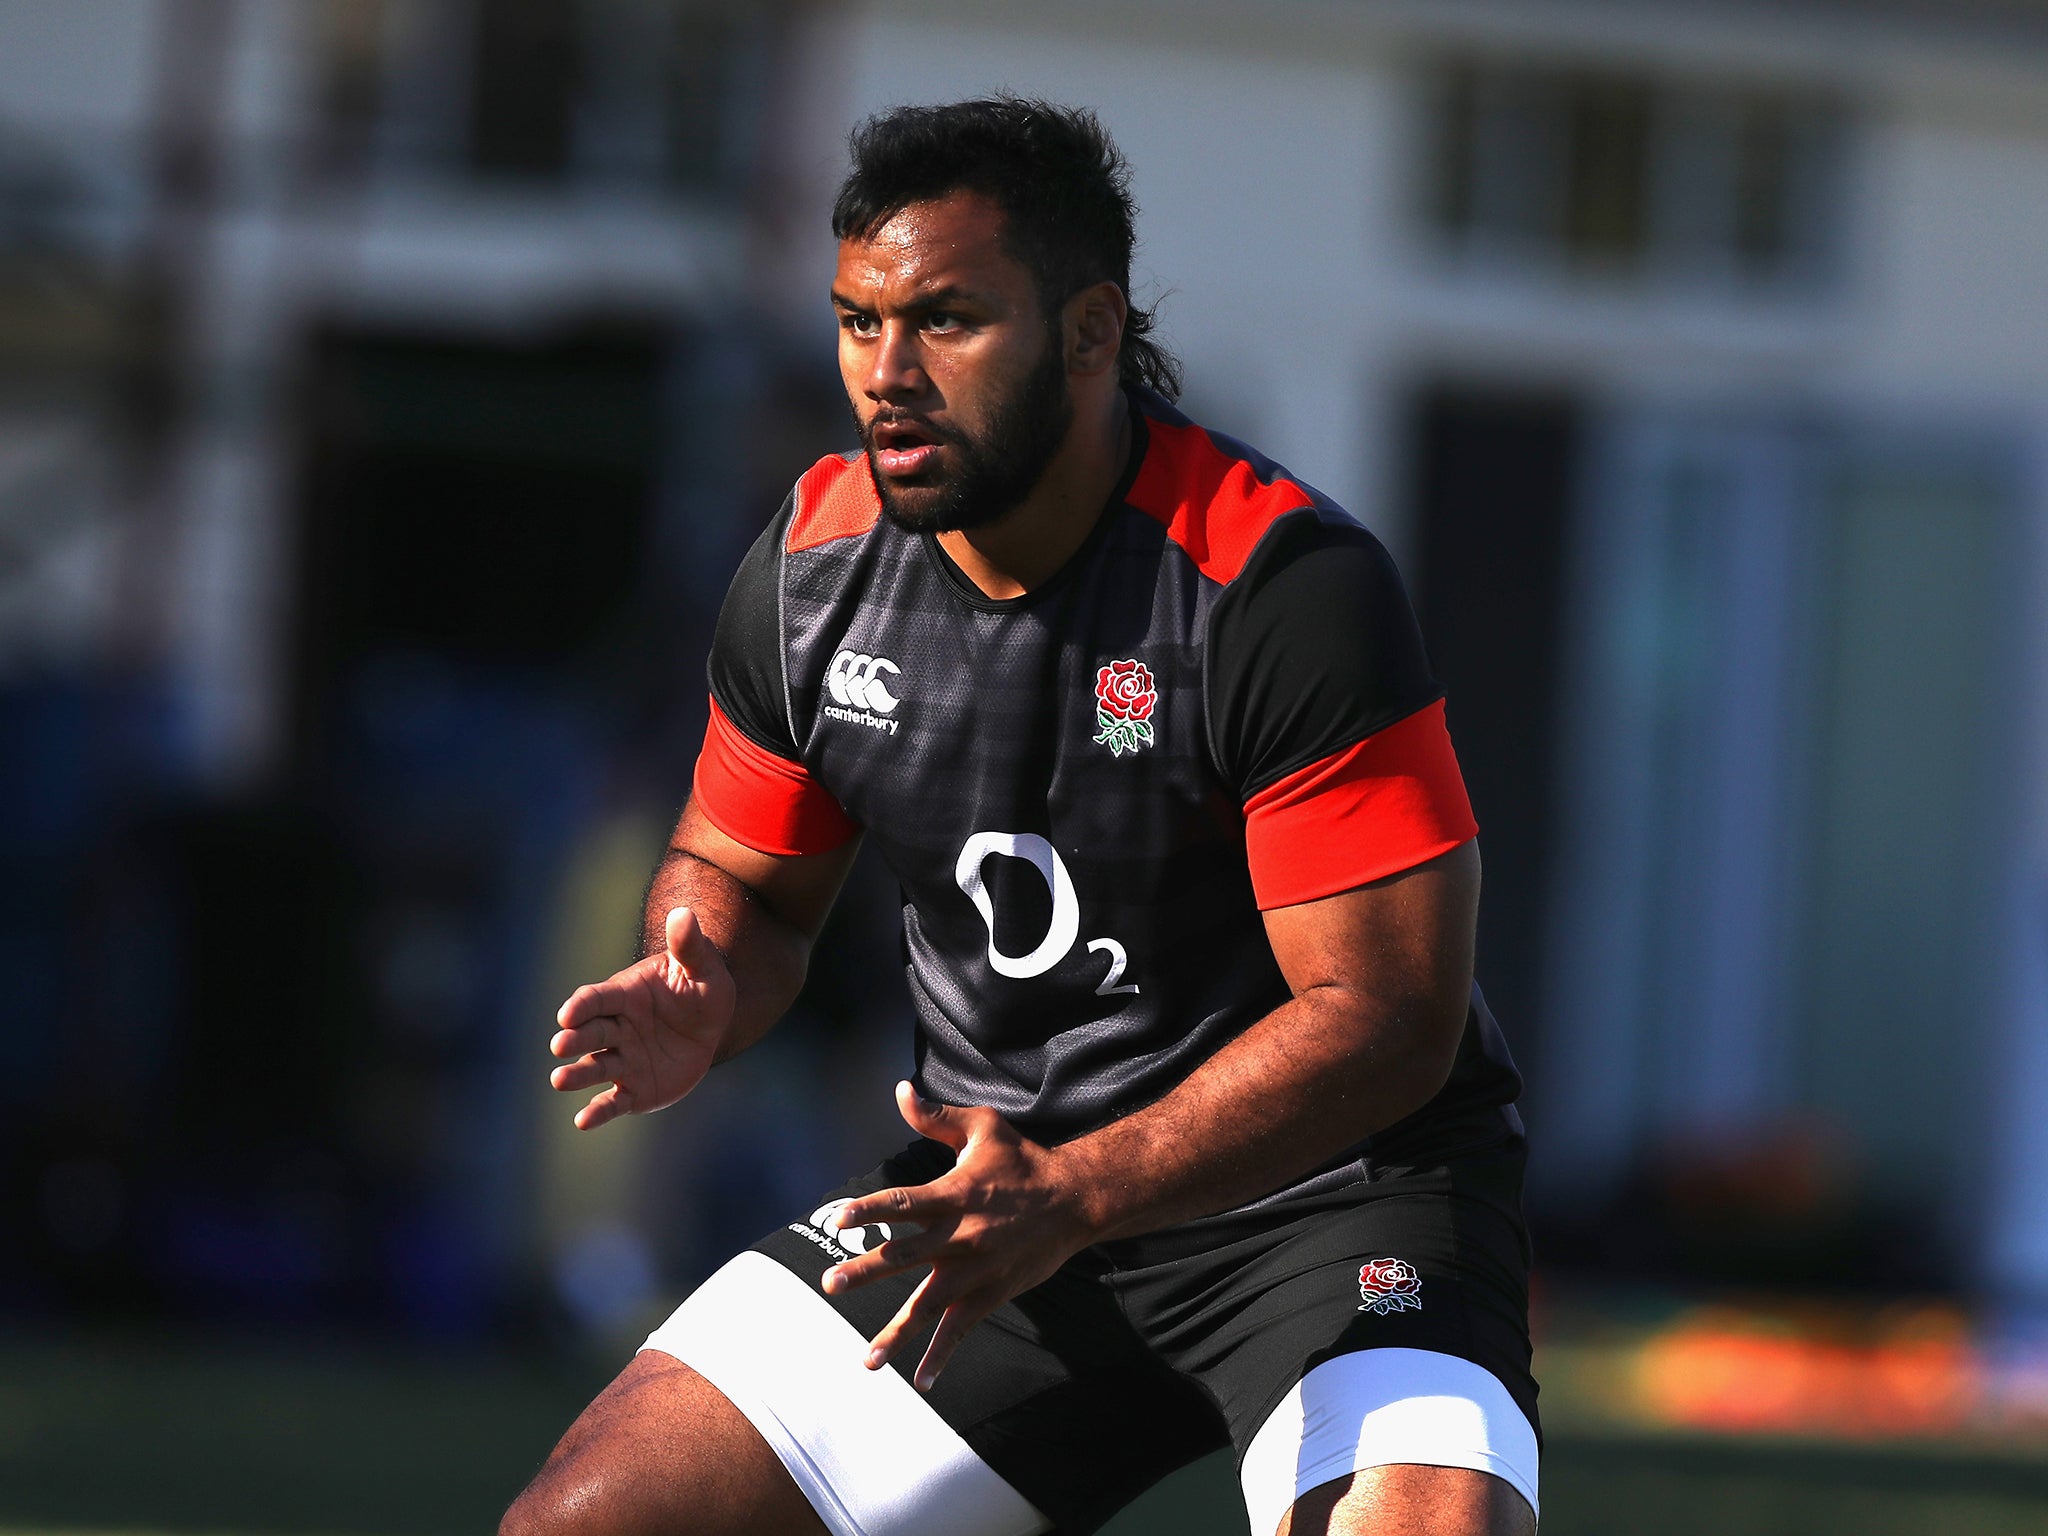 Billy Vunipola starts England's first Test against South Africa on Saturday